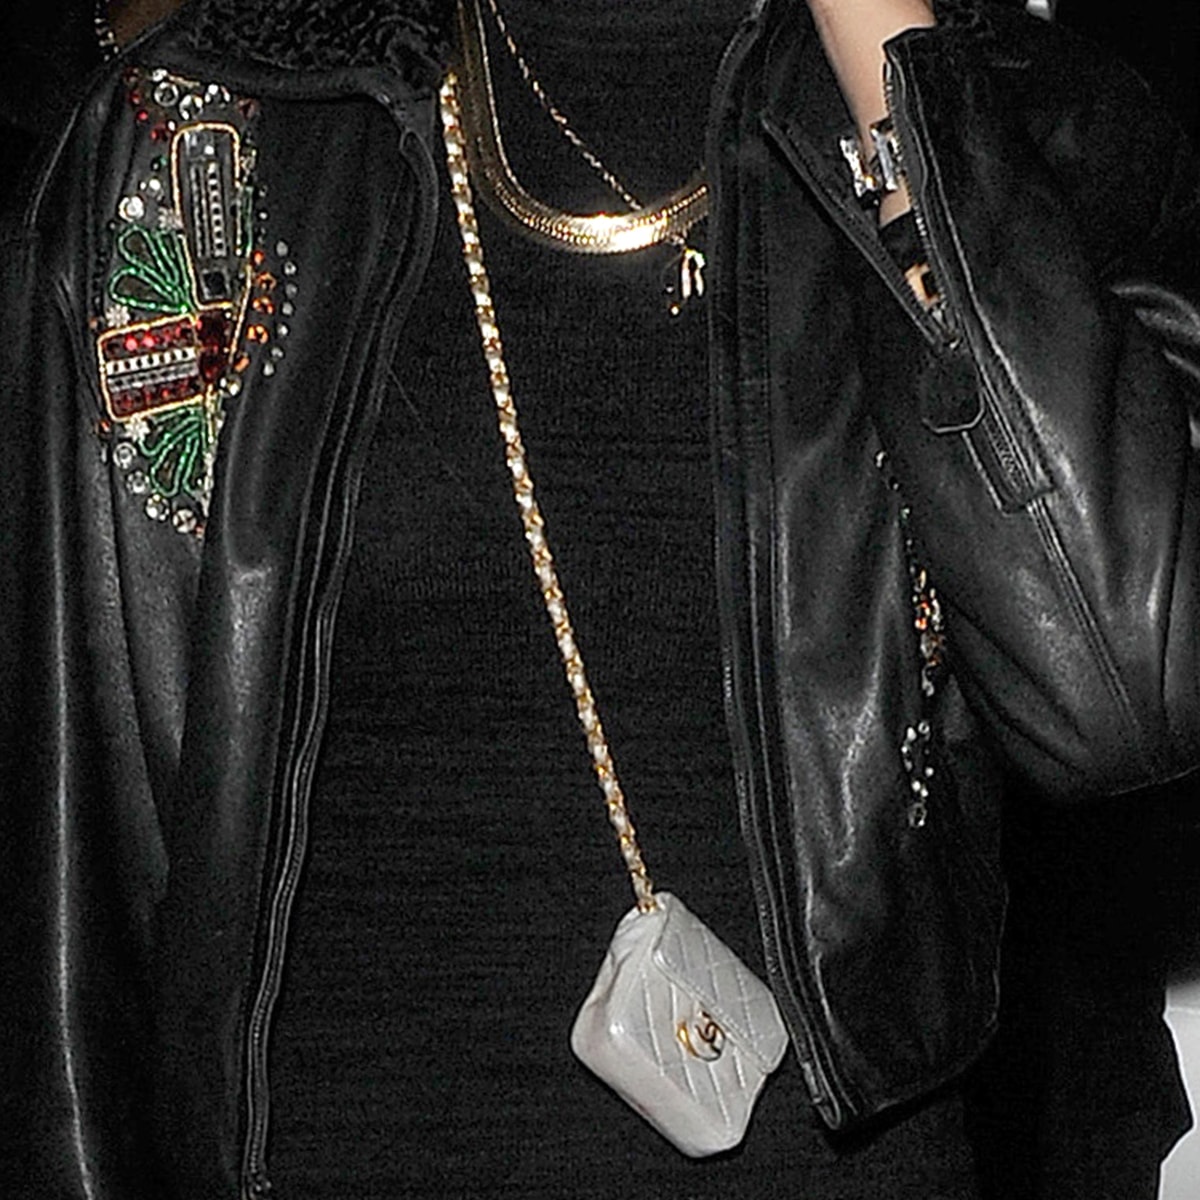 Rihanna with the smallest Chanel bag we've ever seen